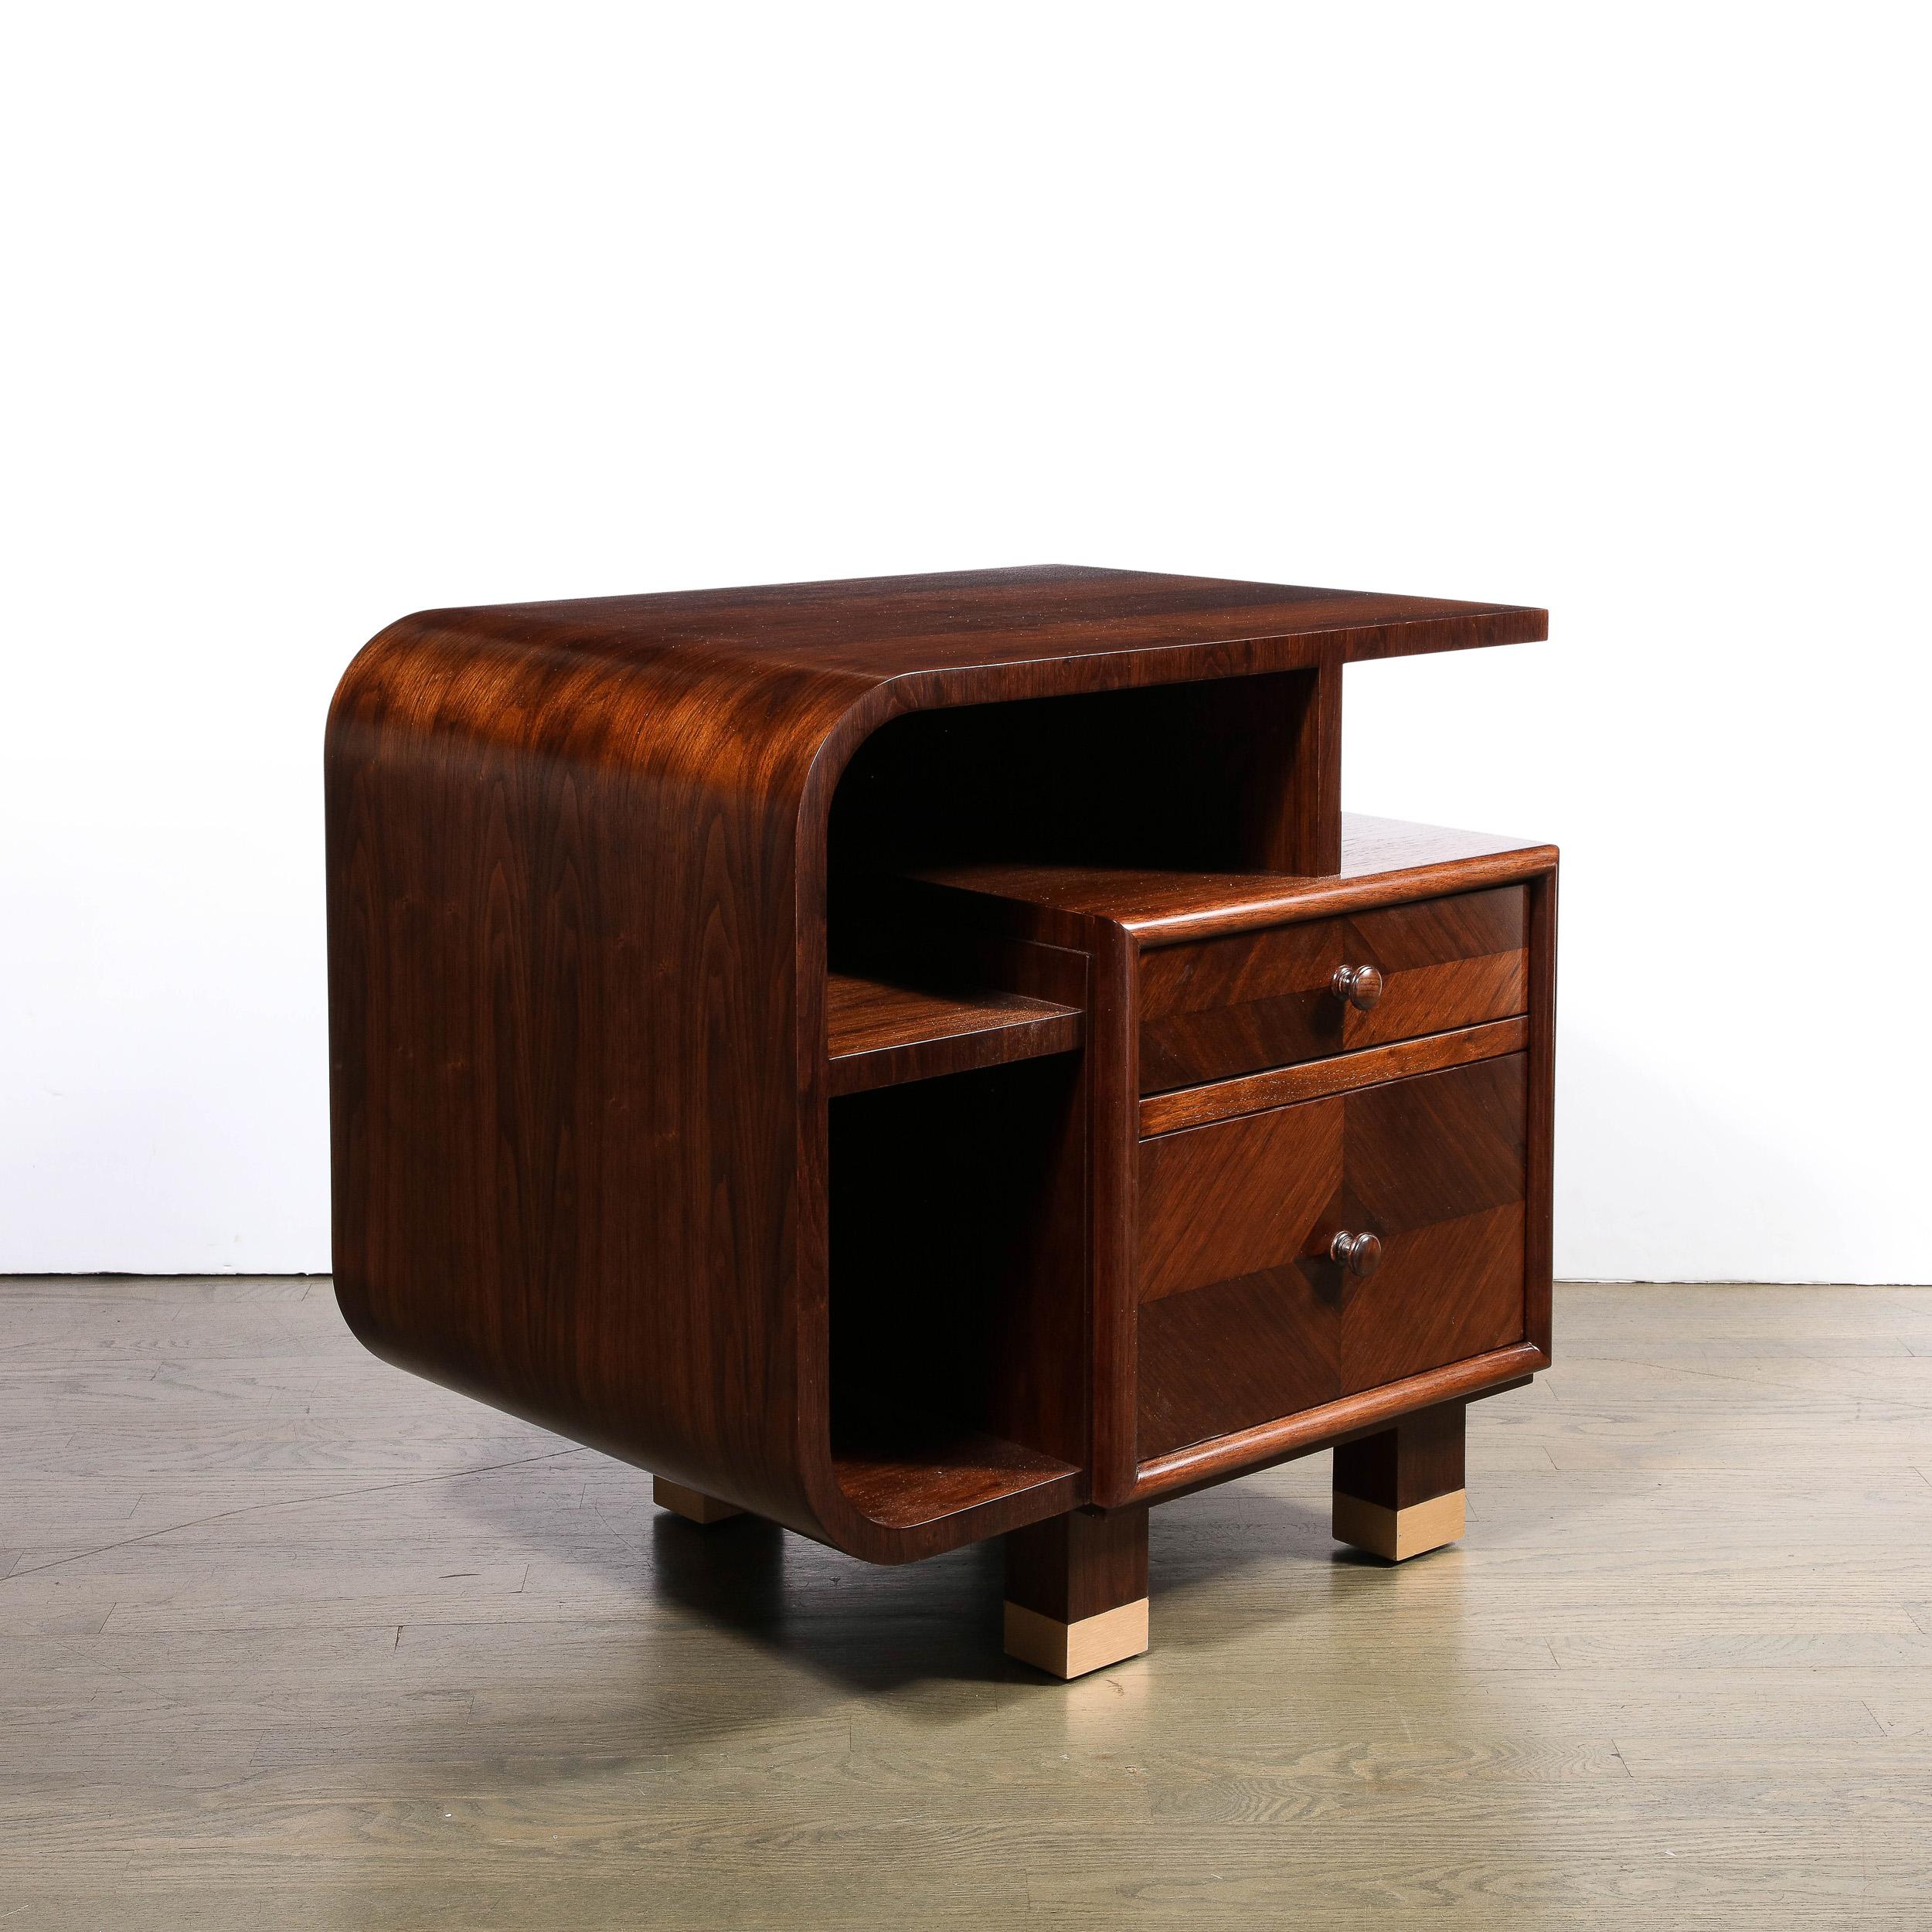 American Custom High Style Art Deco Style Bookmatched Walnut Nightstands w Brass Sabots For Sale